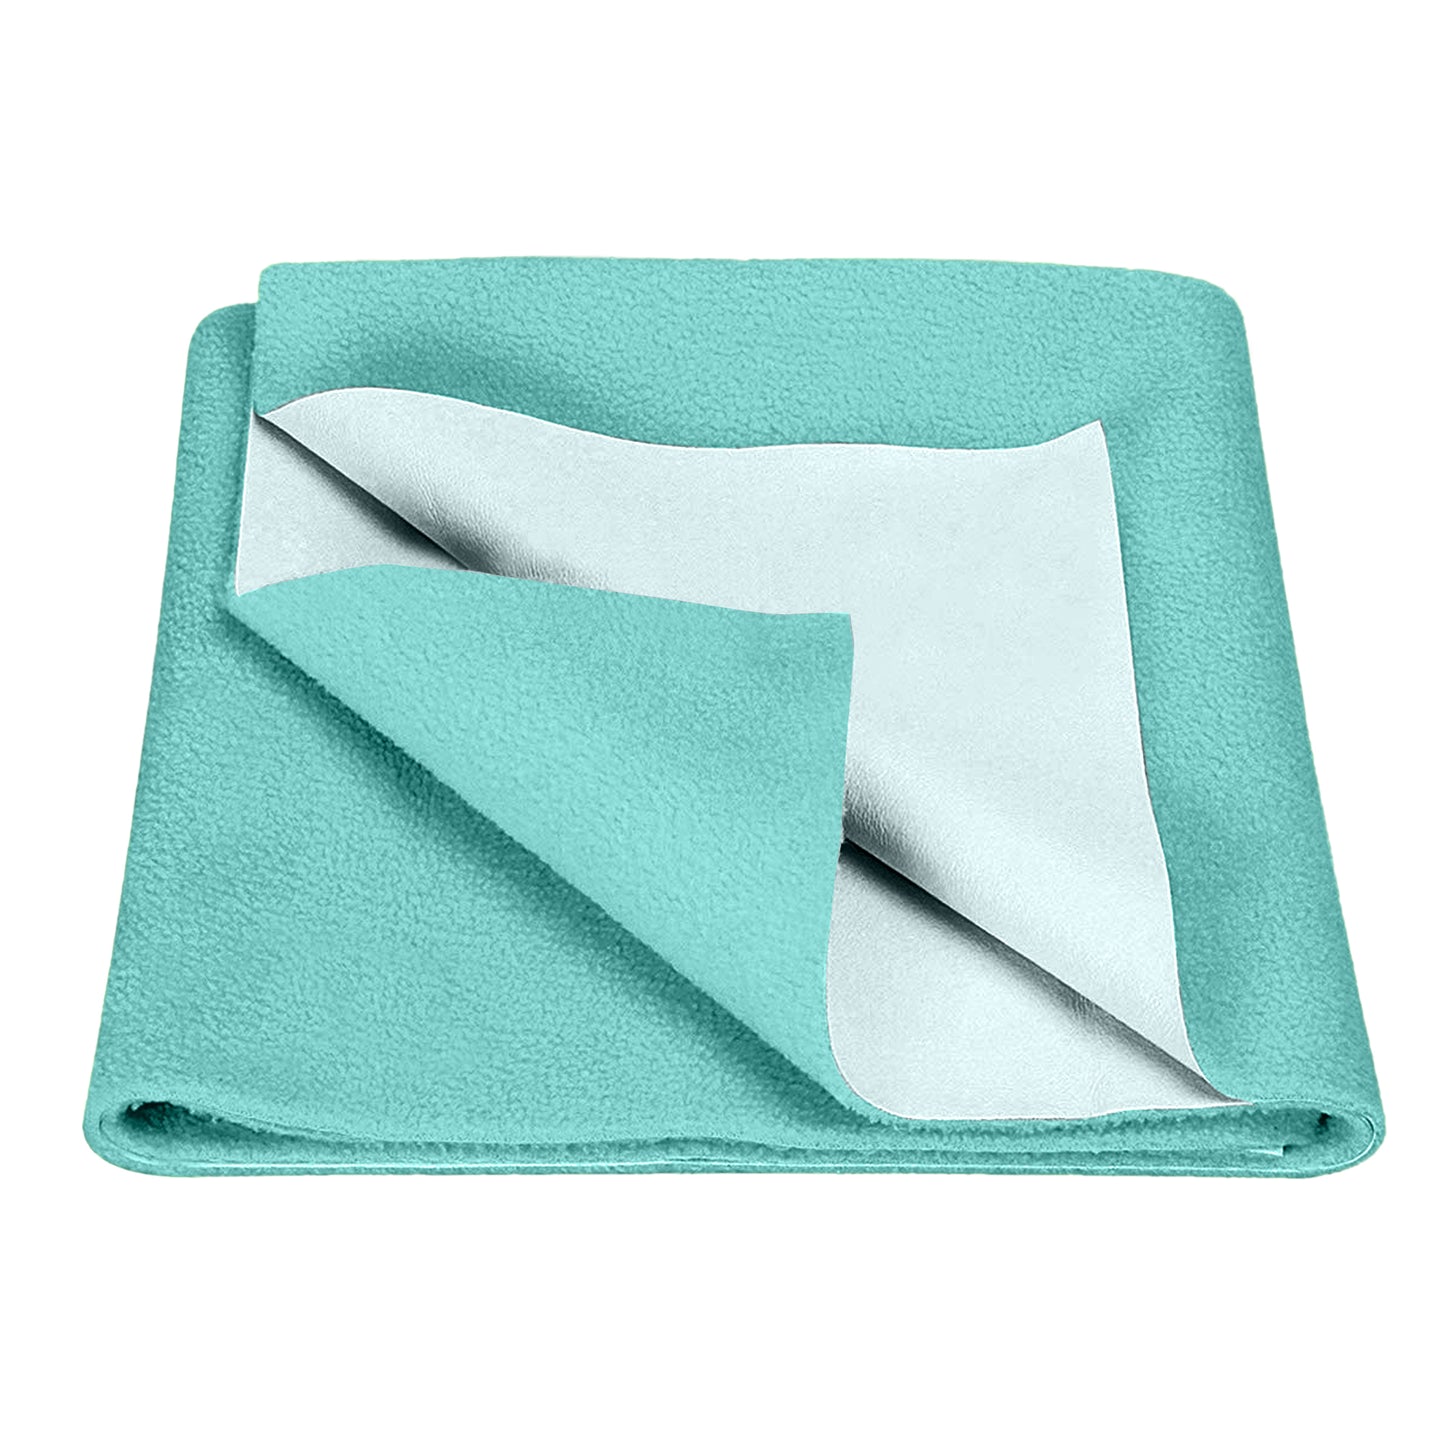 Waterproof Bed Protector, Extra Absorbent Quick Dry Sheet, Baby Bed Protector, Small Size(70 X 50 CM), Pack of 2 -BABY BLUE